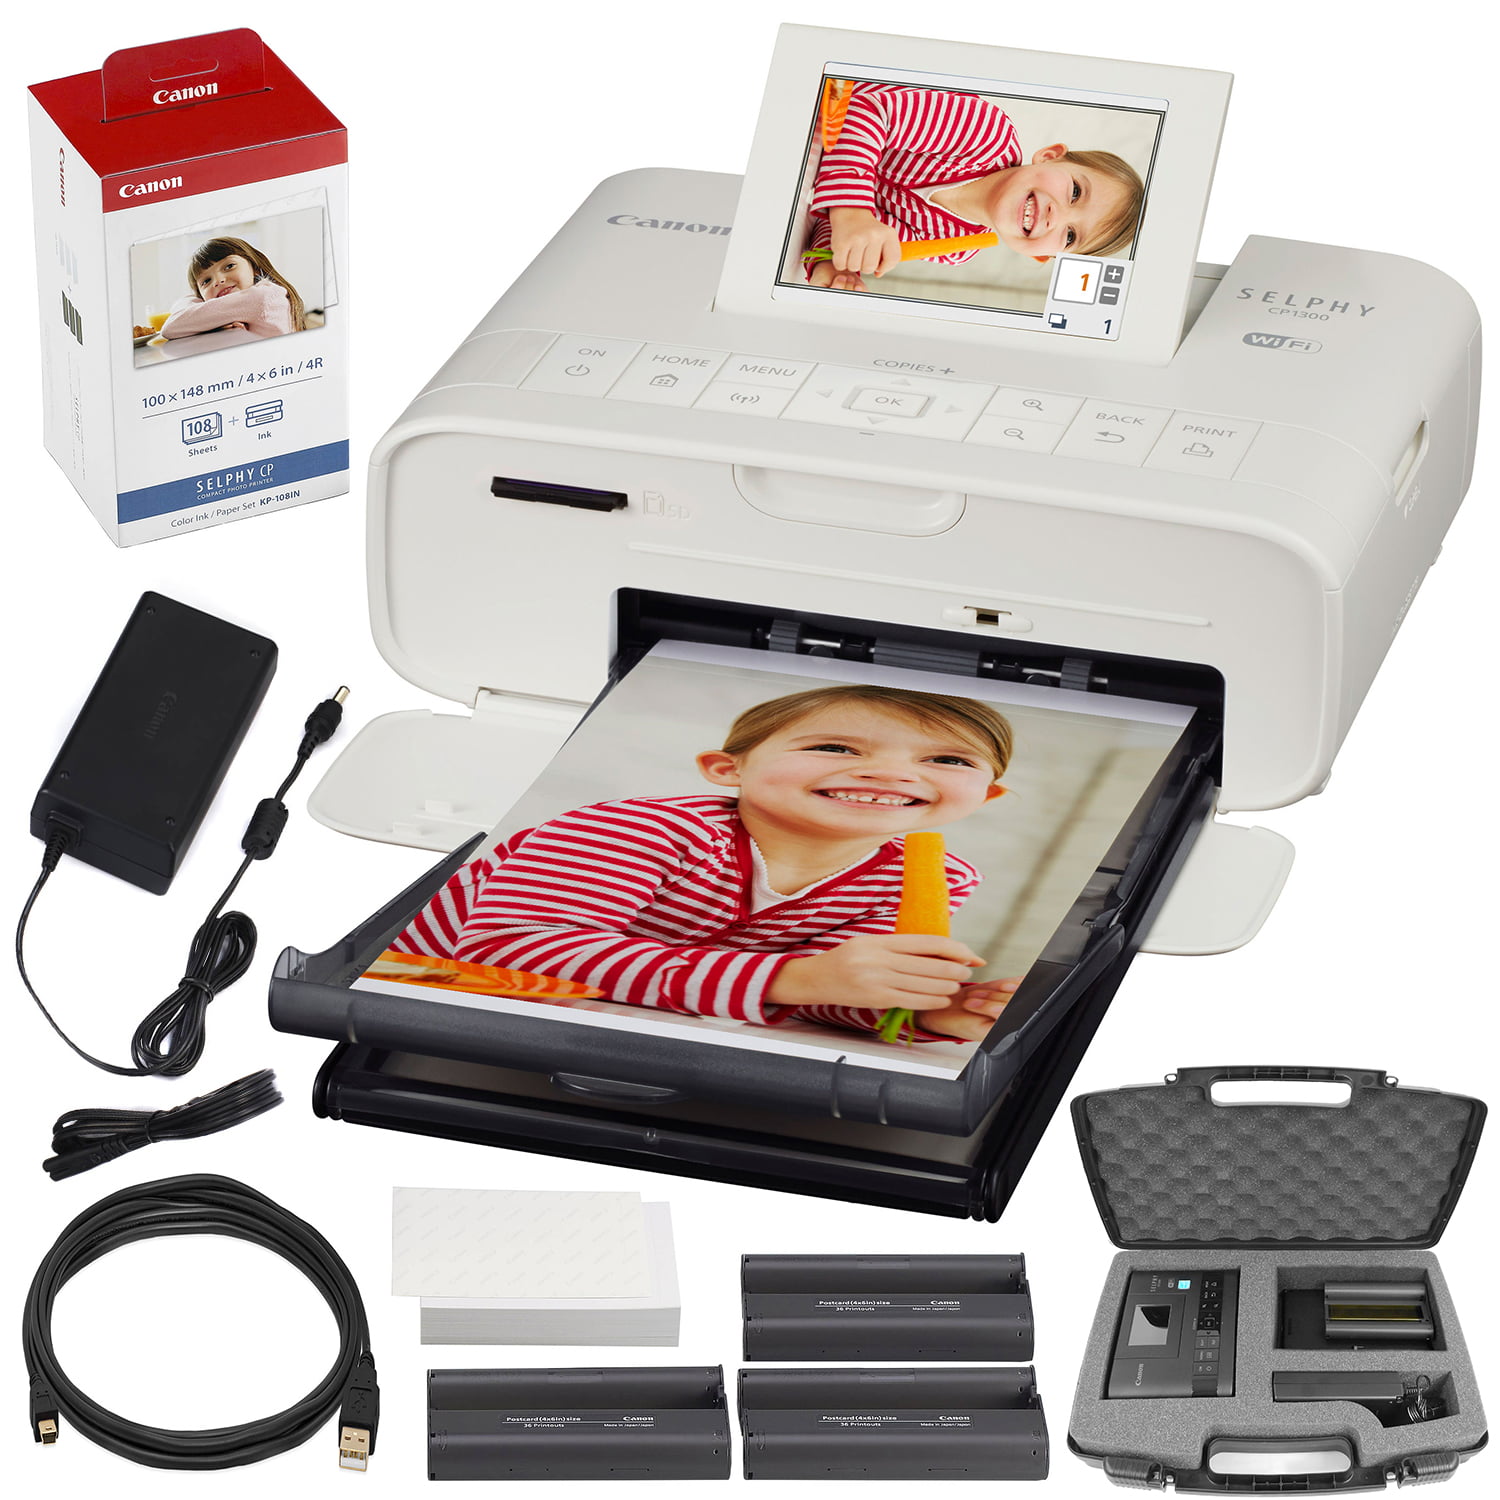 Goed gevoel Bijlage doos Canon SELPHY CP1300 Compact Photo Printer (White) with WiFi and Accessory  Bundle w/ Canon Color Ink and Paper Set + Case + More - Walmart.com